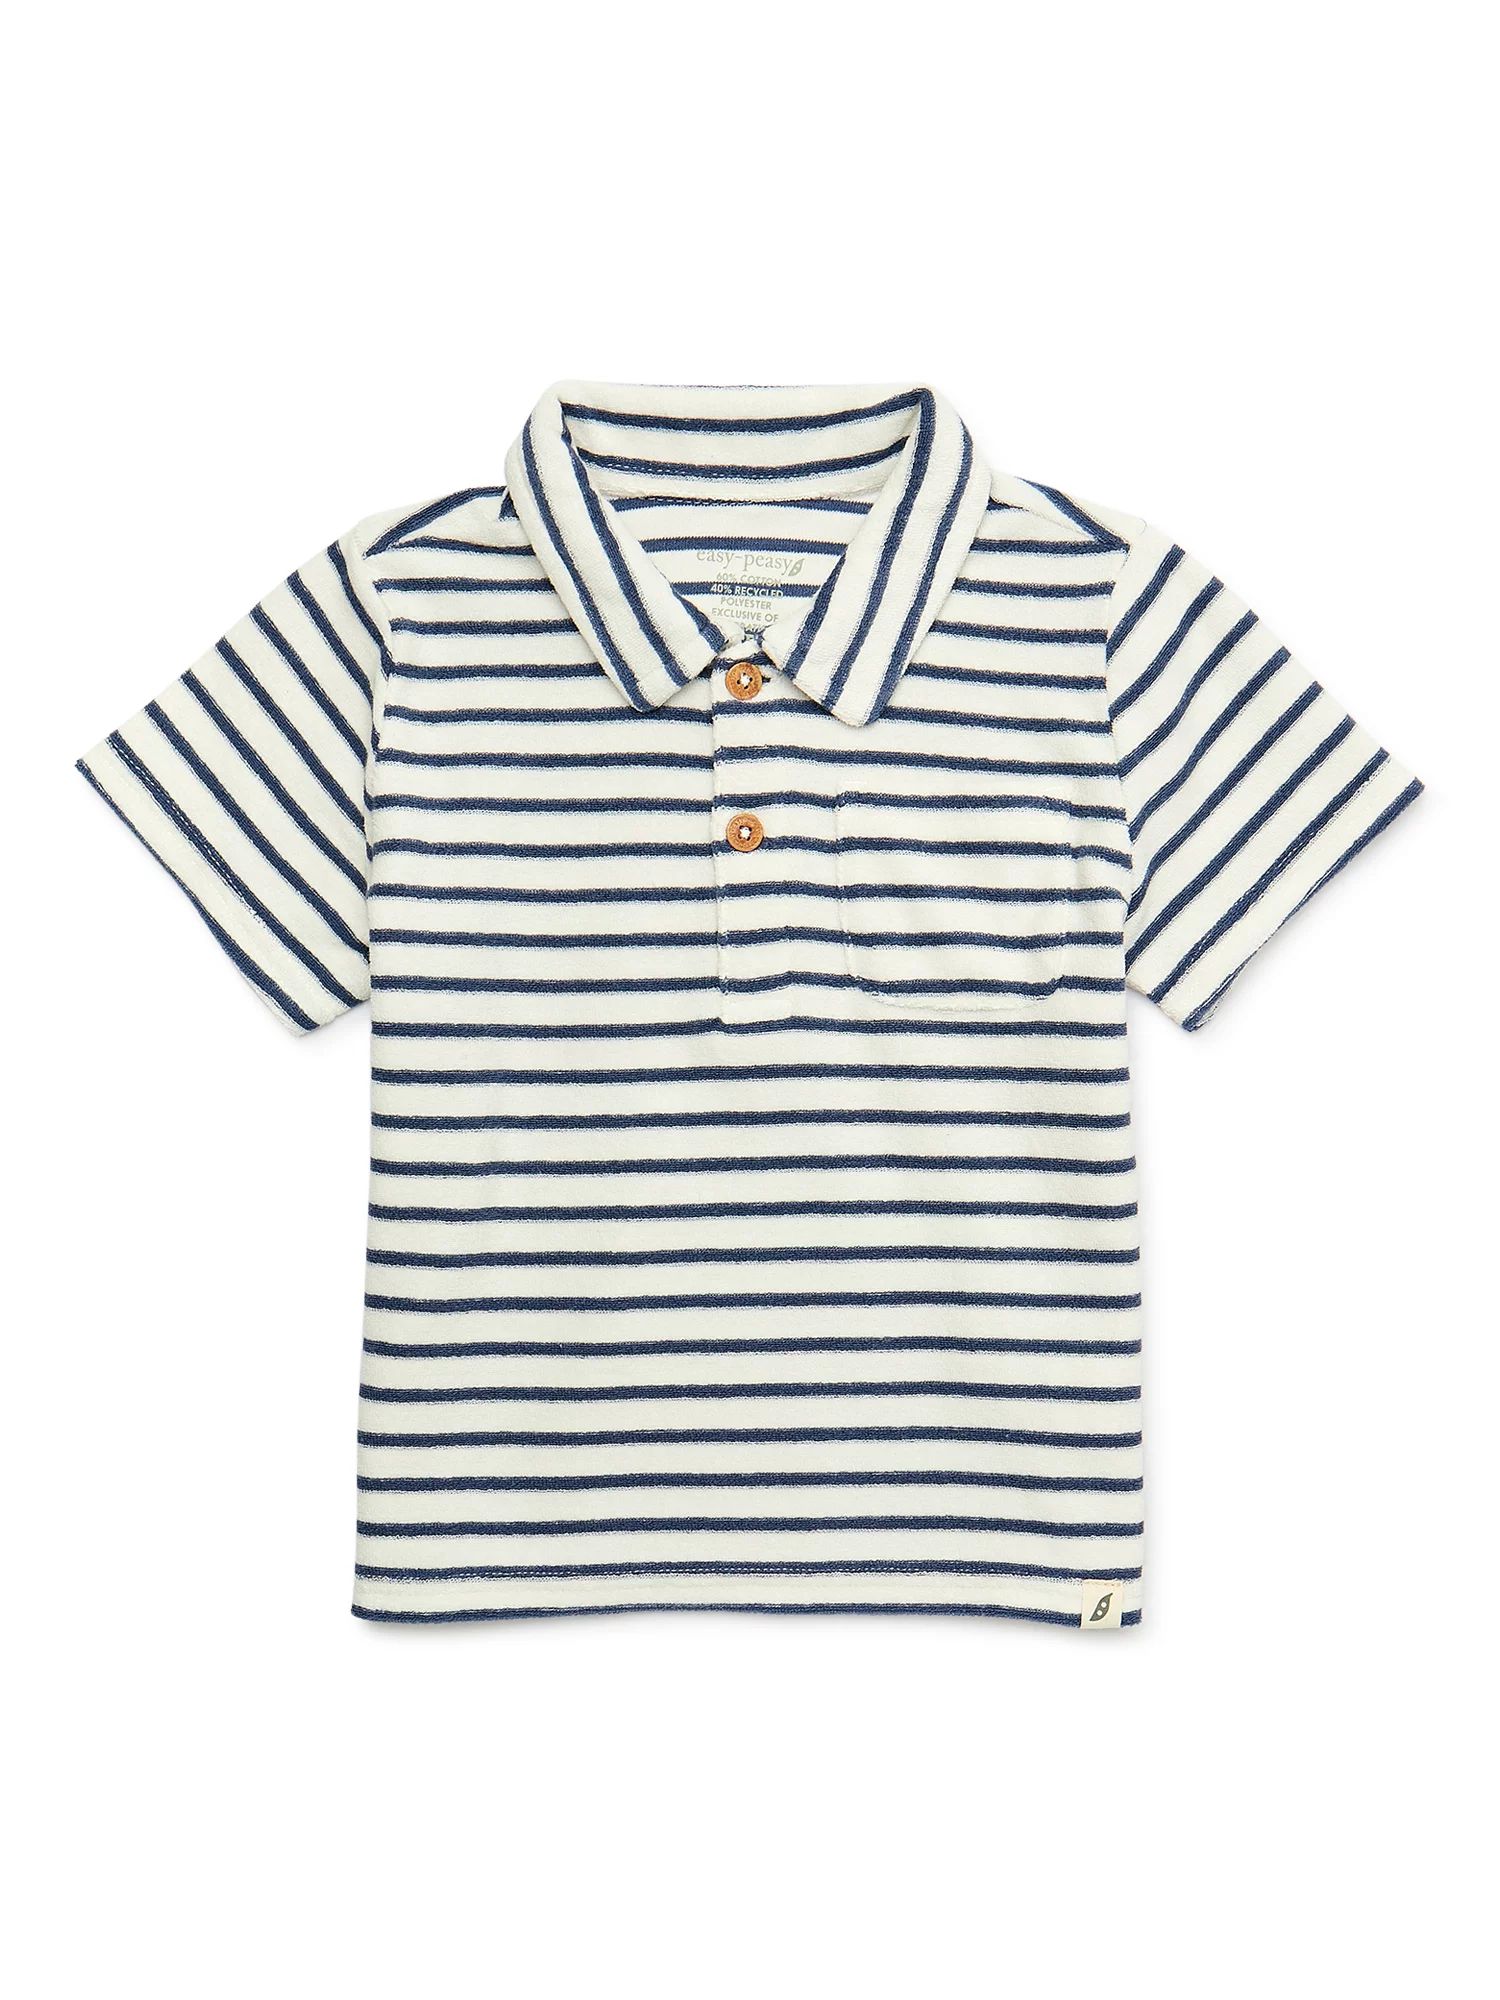 easy-peasy Toddler Boy Terry Short Sleeve Polo, Sizes 12M-5T | Walmart (US)